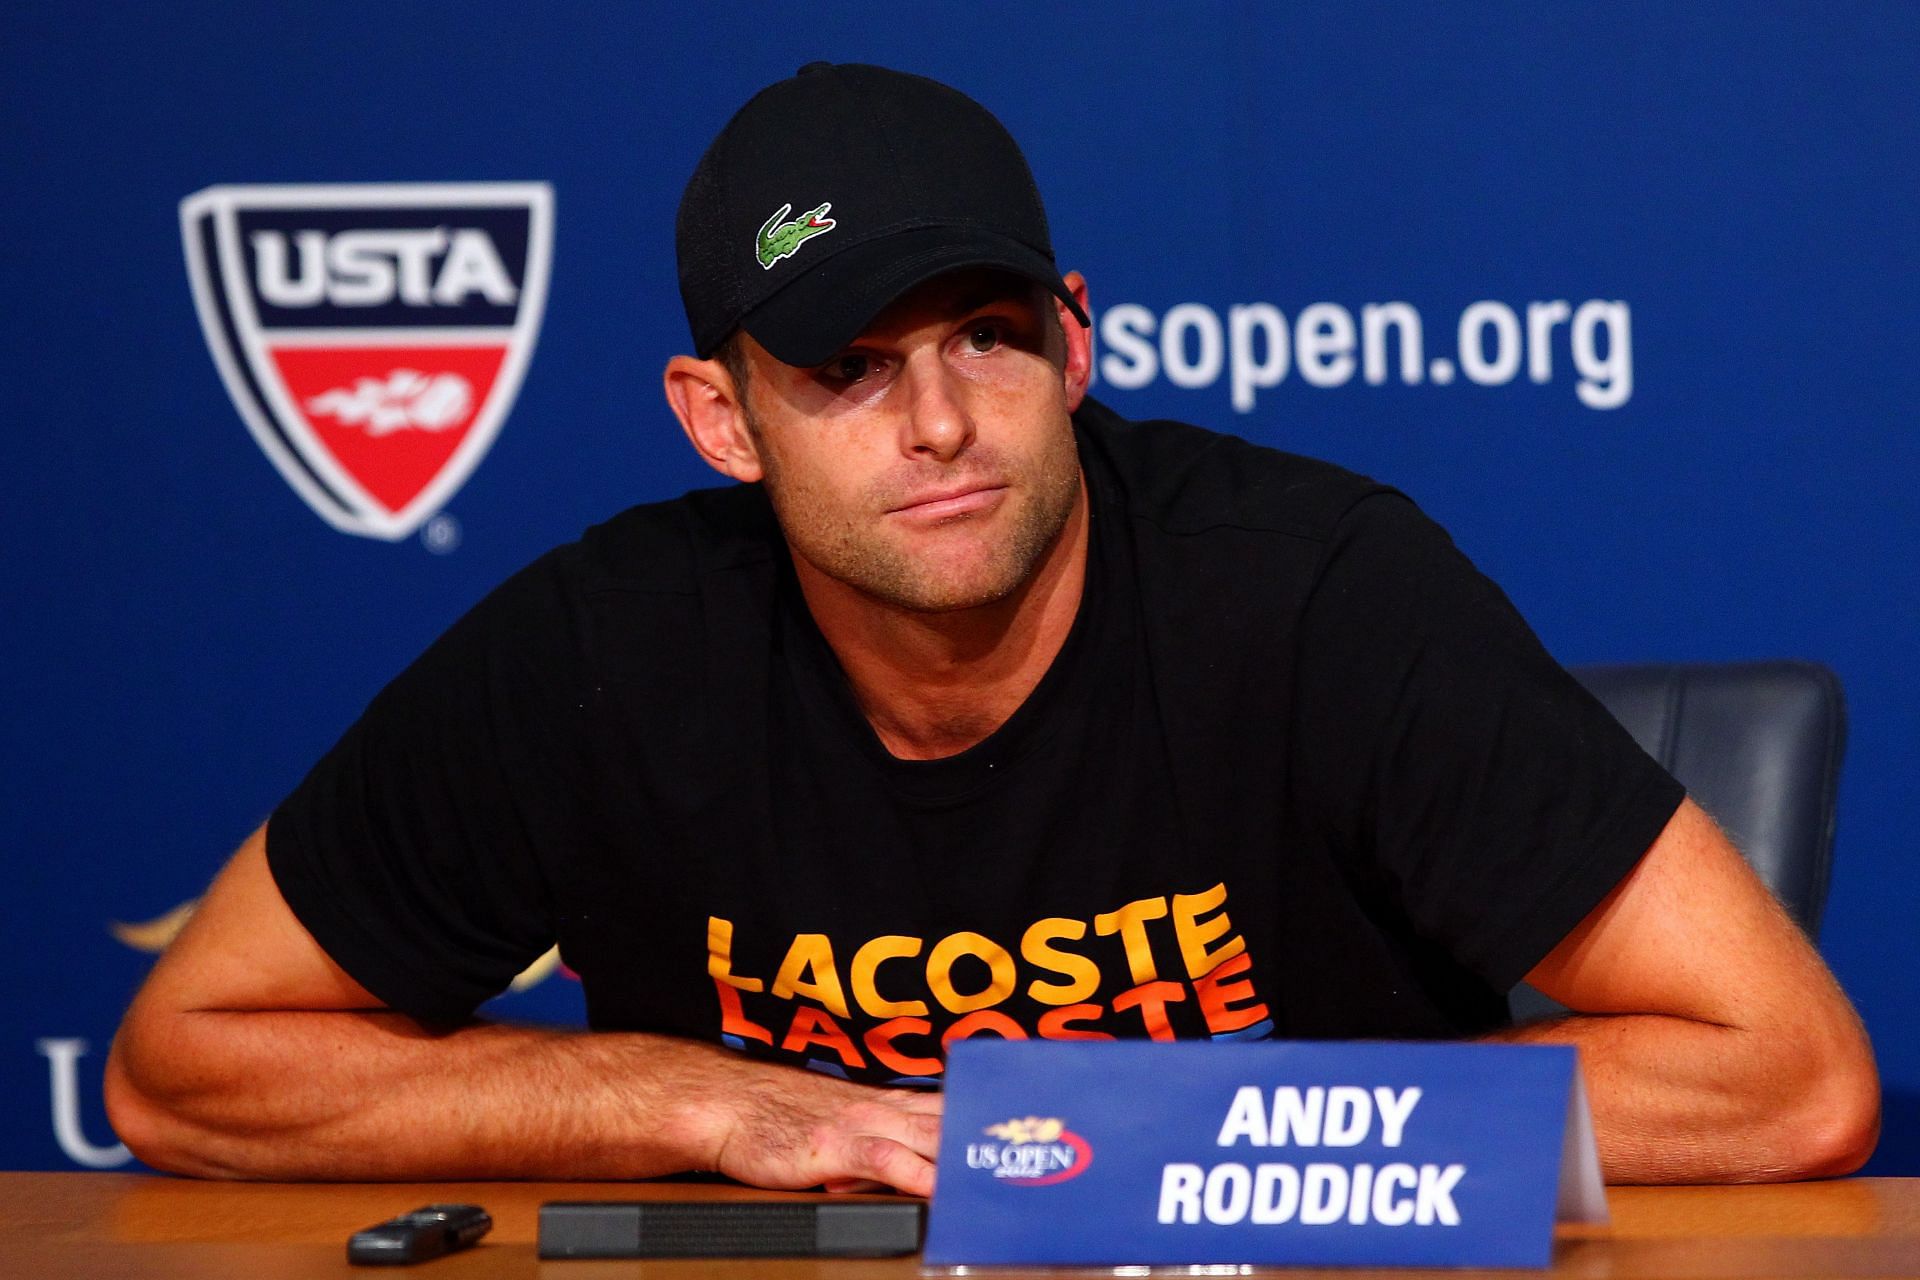 Andy Roddick interacts with the media at the 2012 US Open